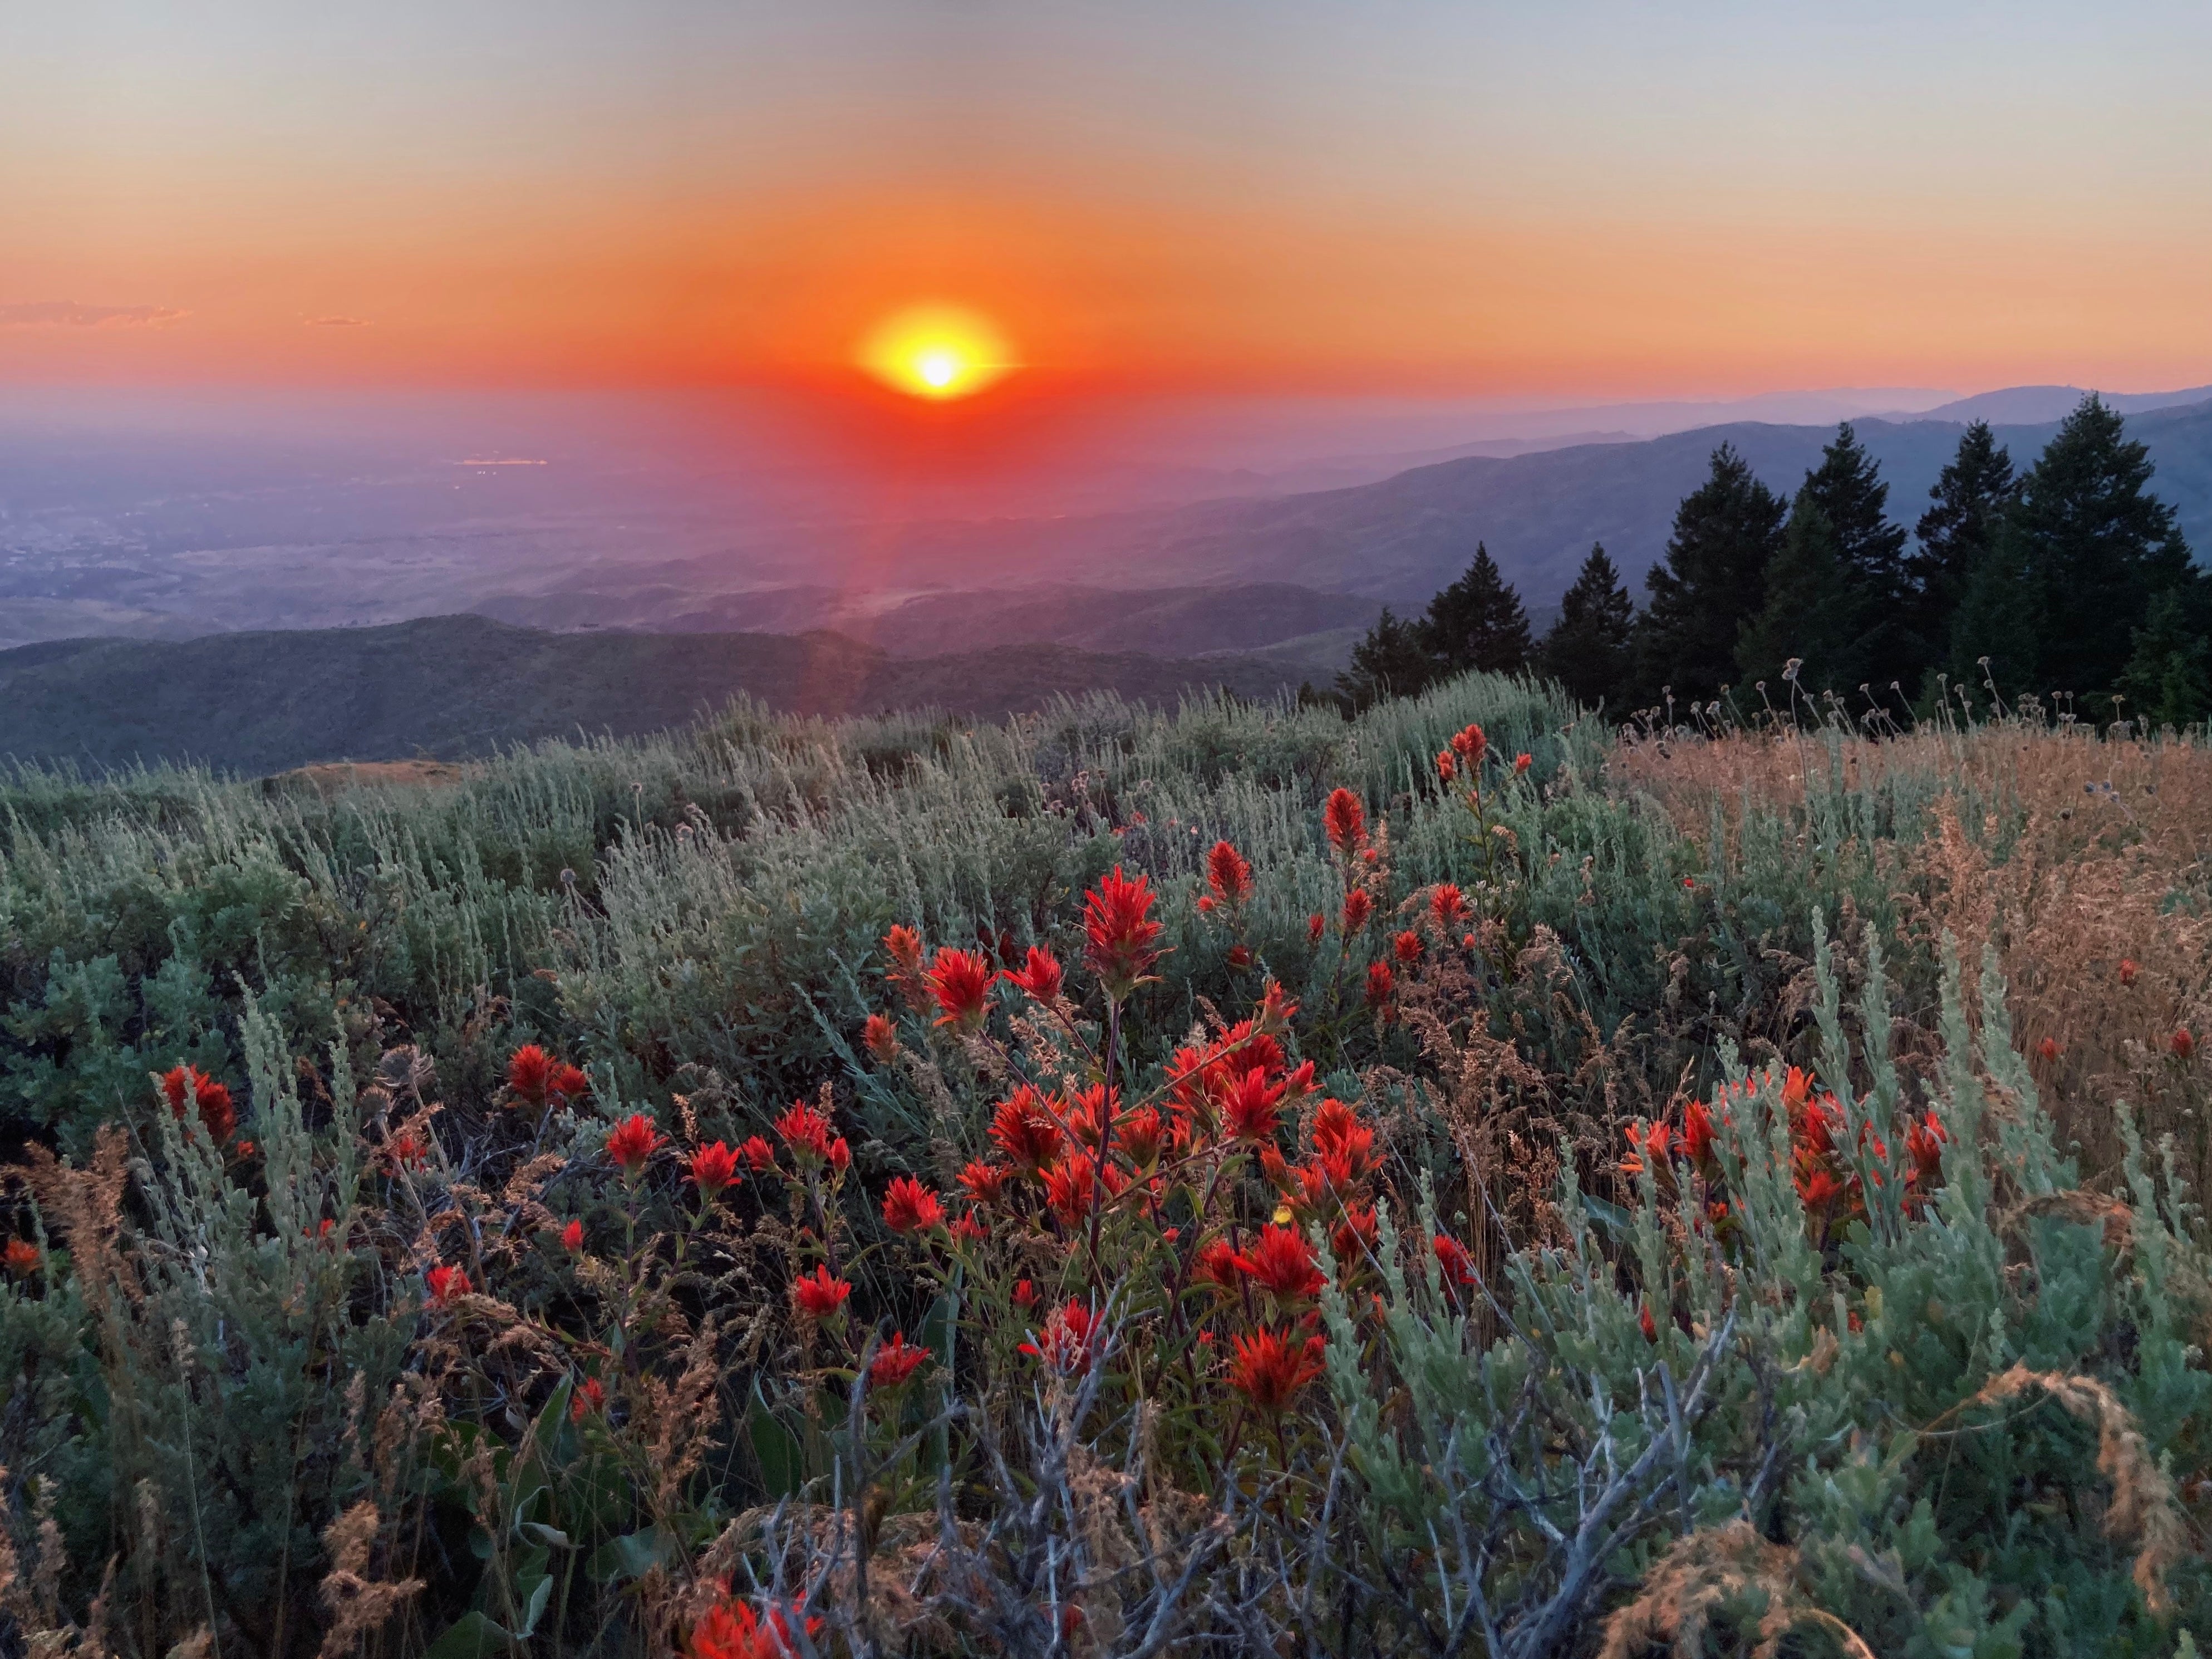 sun setting over mountains casting multiple hues of orange, pink, blue and purple. Red paintbrush flowers and green sagebrush glow in the foreground